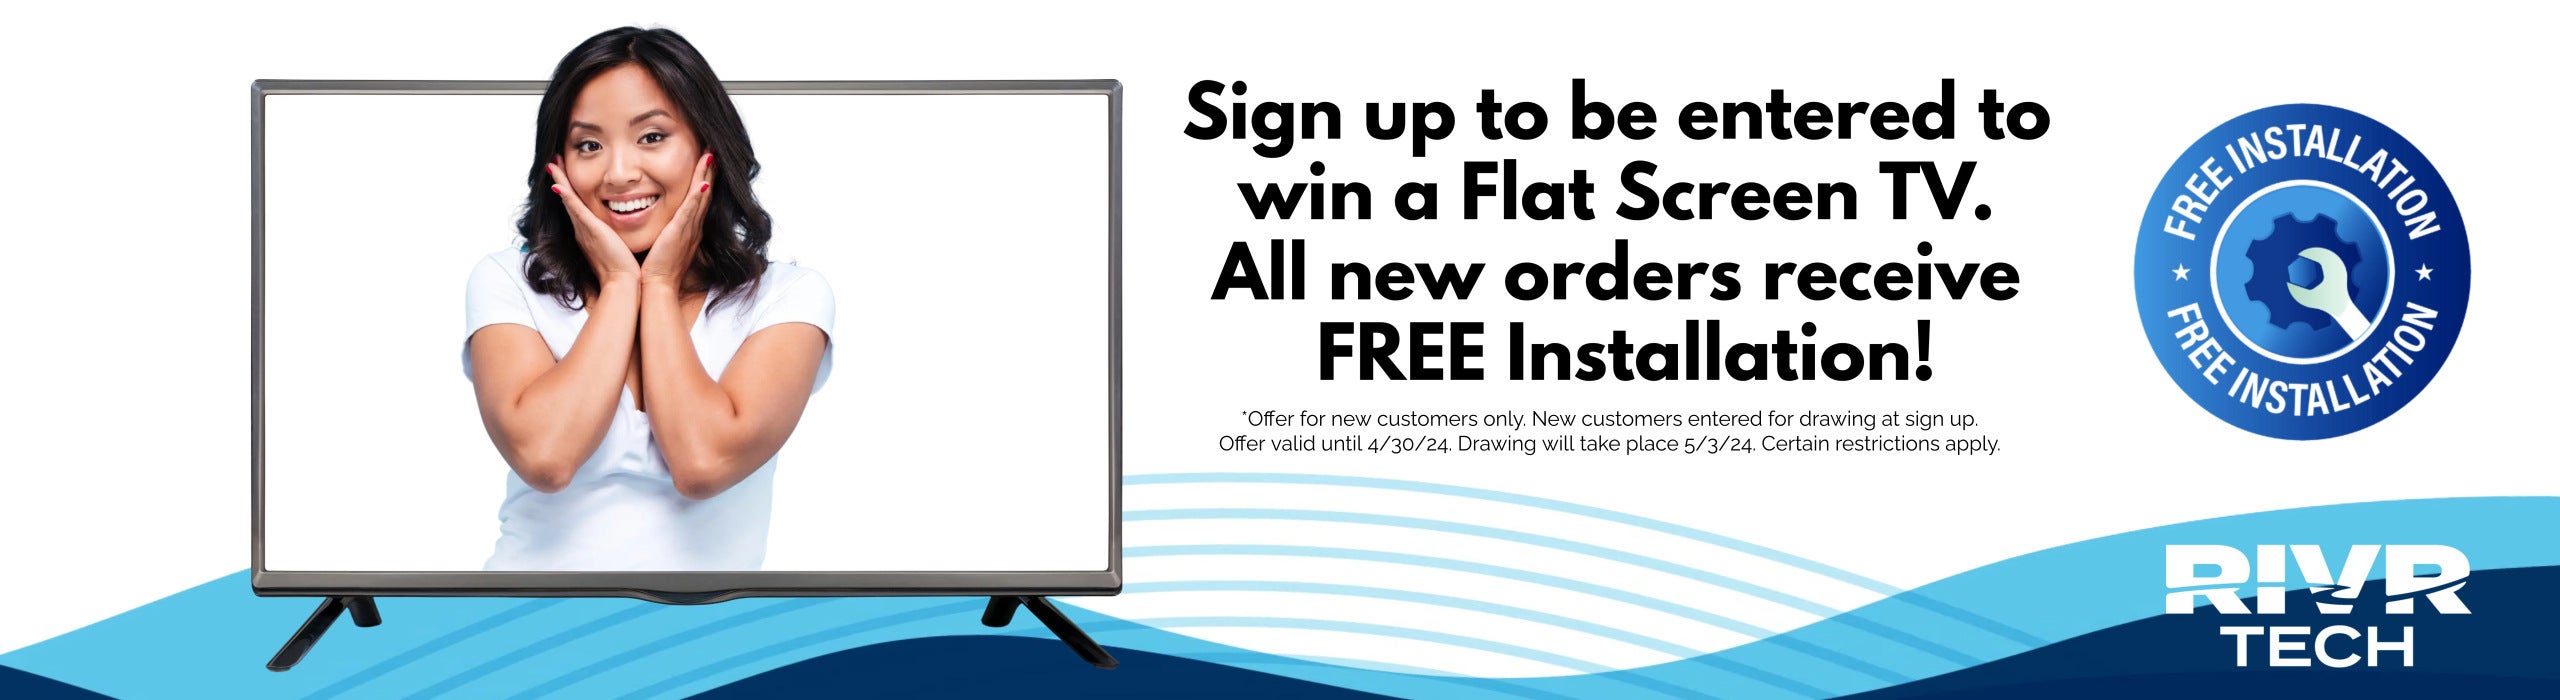 Sign up to win a Free TV and receive free installation.